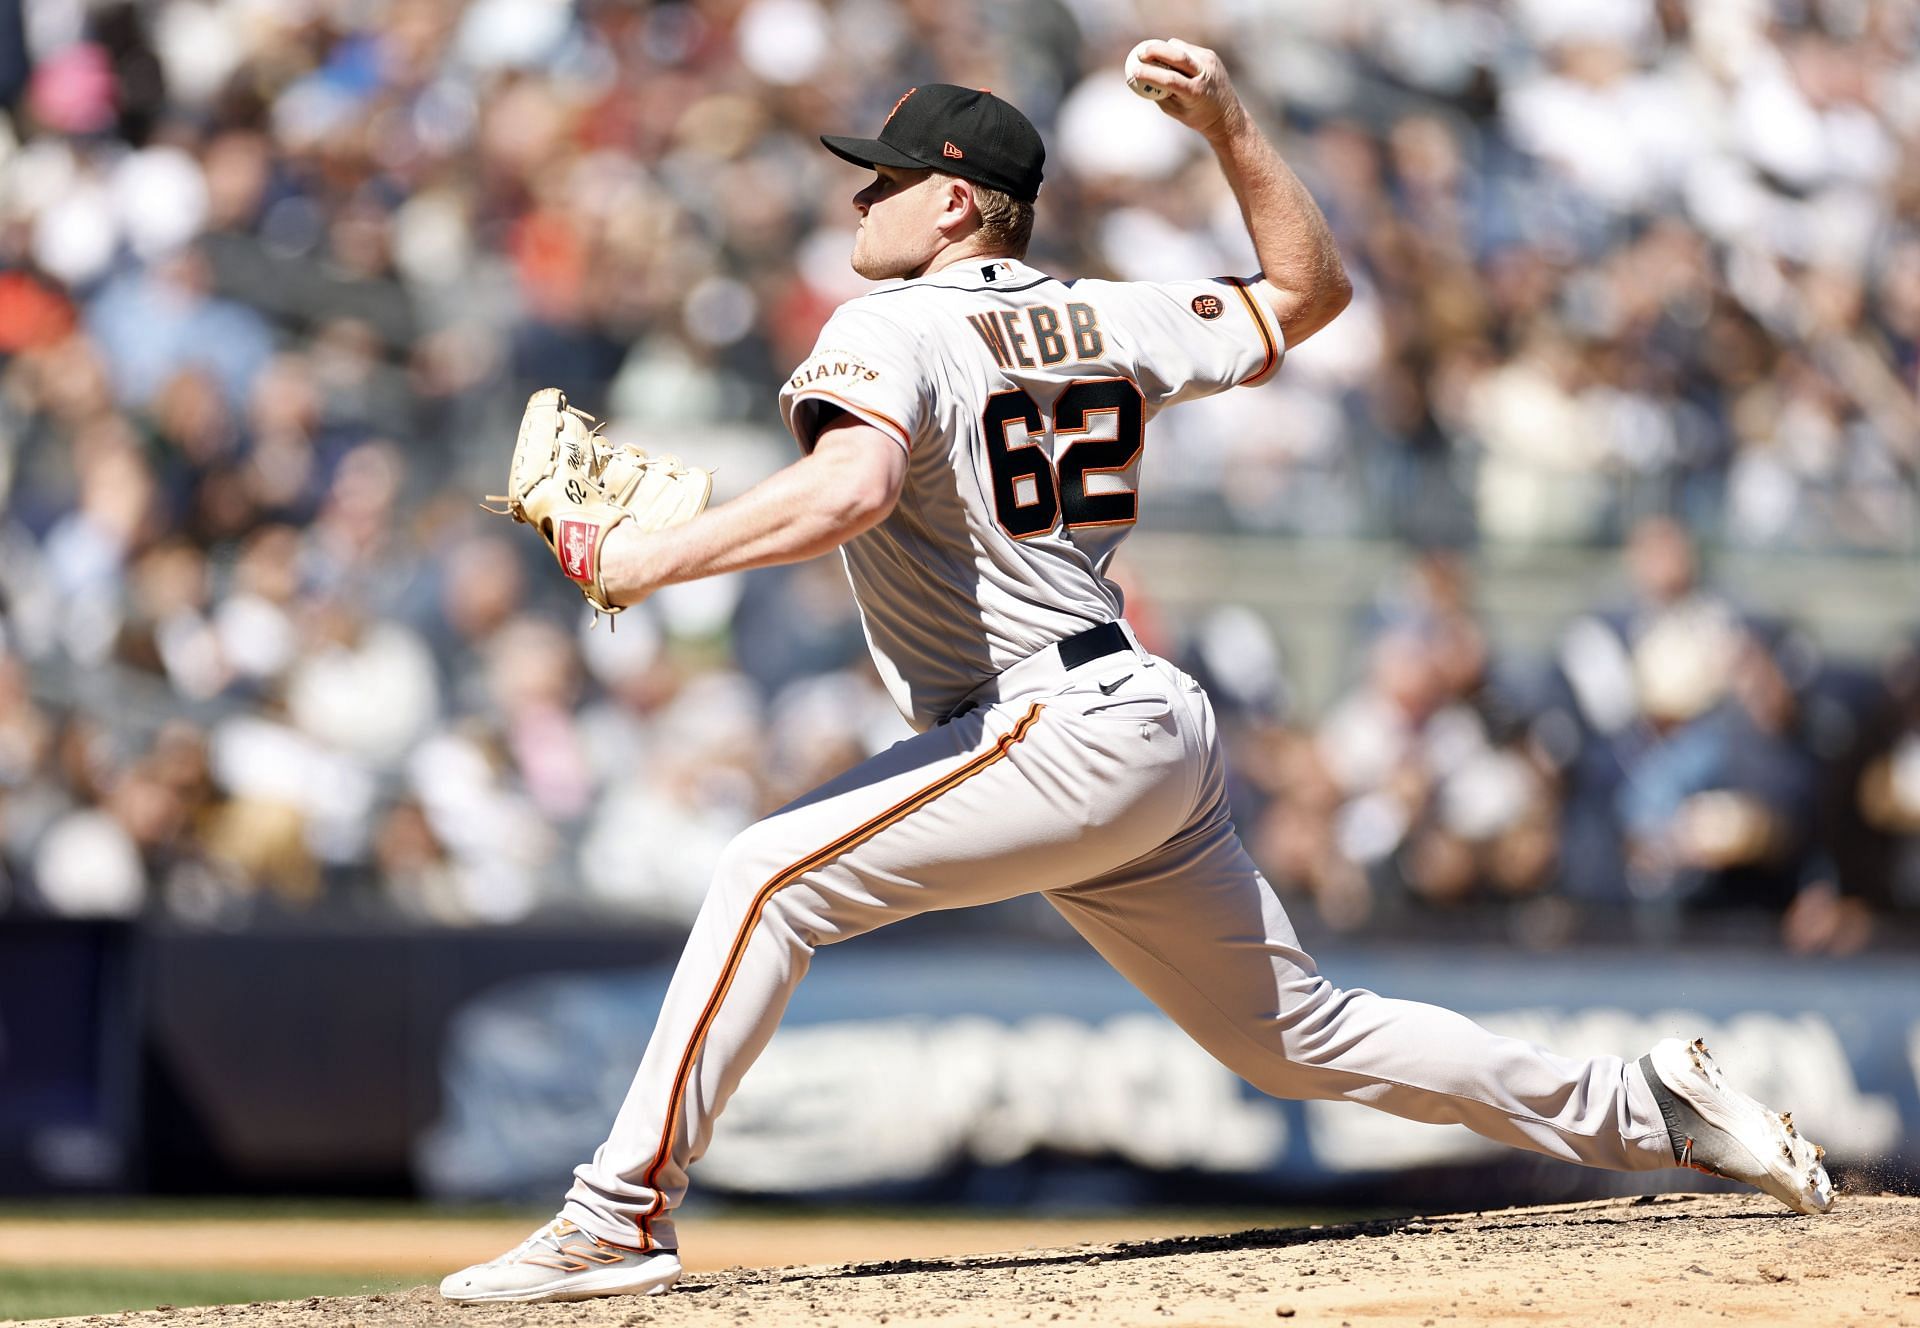 SF Giants on NBCS on X: Logan Webb explains his side of the seventh inning  balk situation  / X